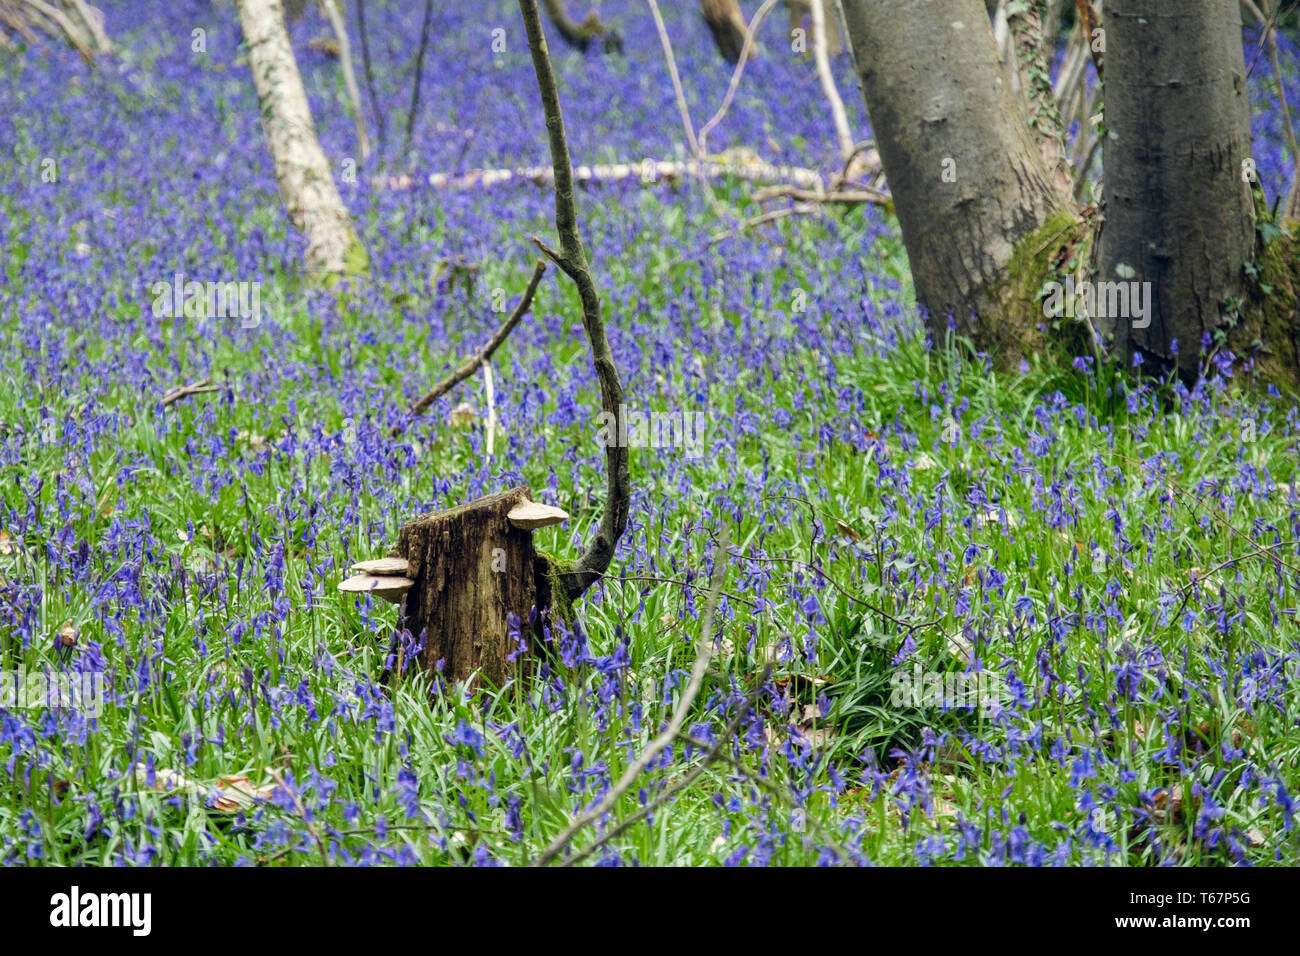 Bracket fungus on old tree stump with native English Bluebells growing in a Bluebell wood in spring. West Stoke, Chichester, West Sussex, England, UK Stock Photo